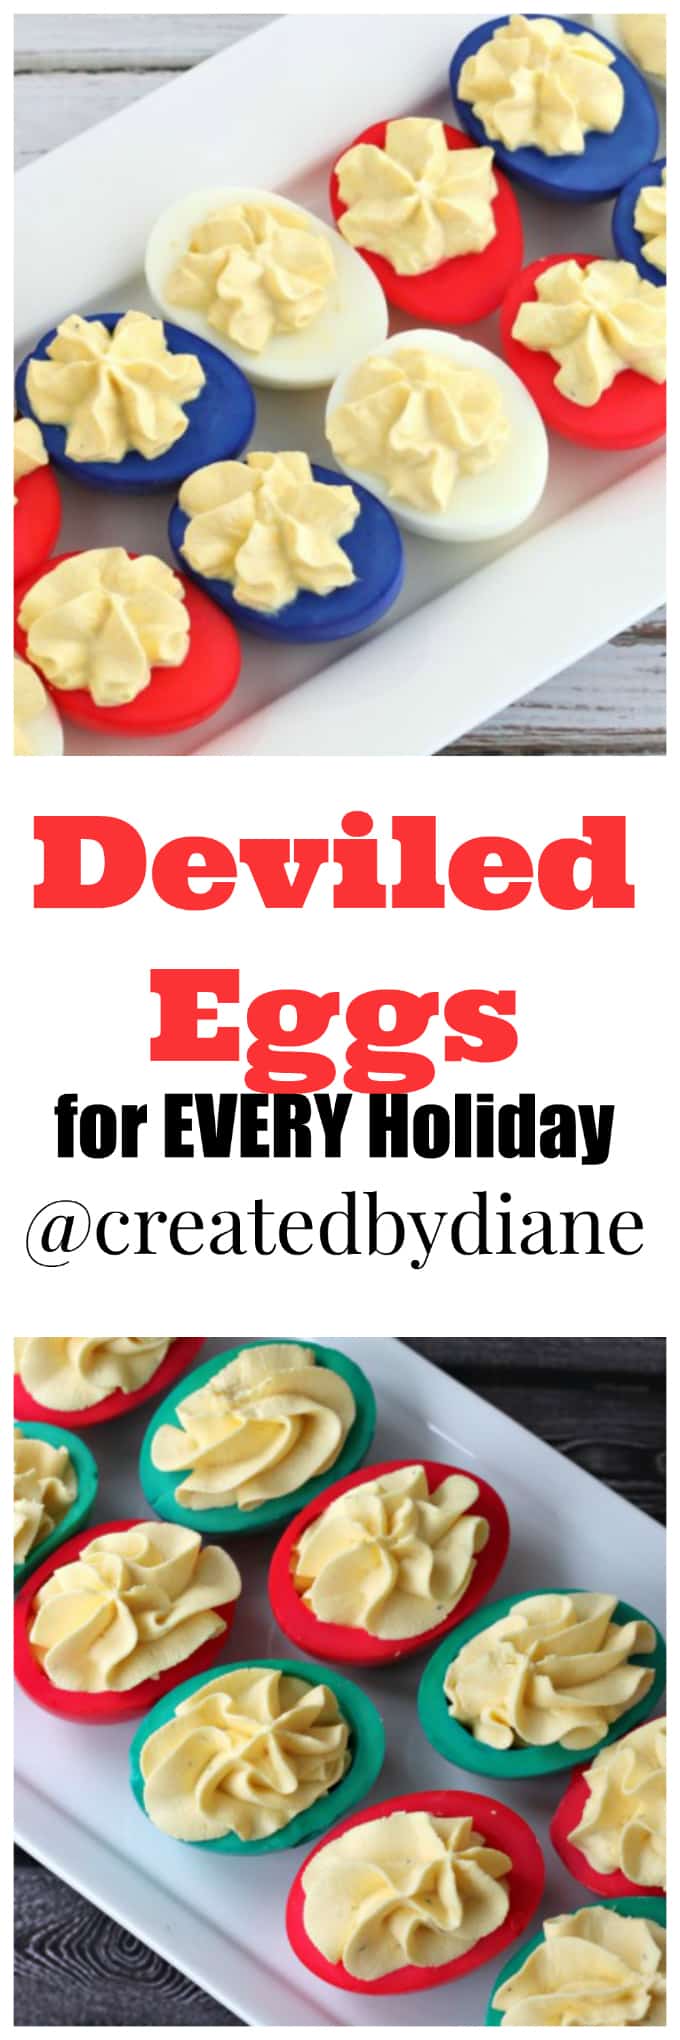 deviled-eggs-for-every-holiday-createdbydiane